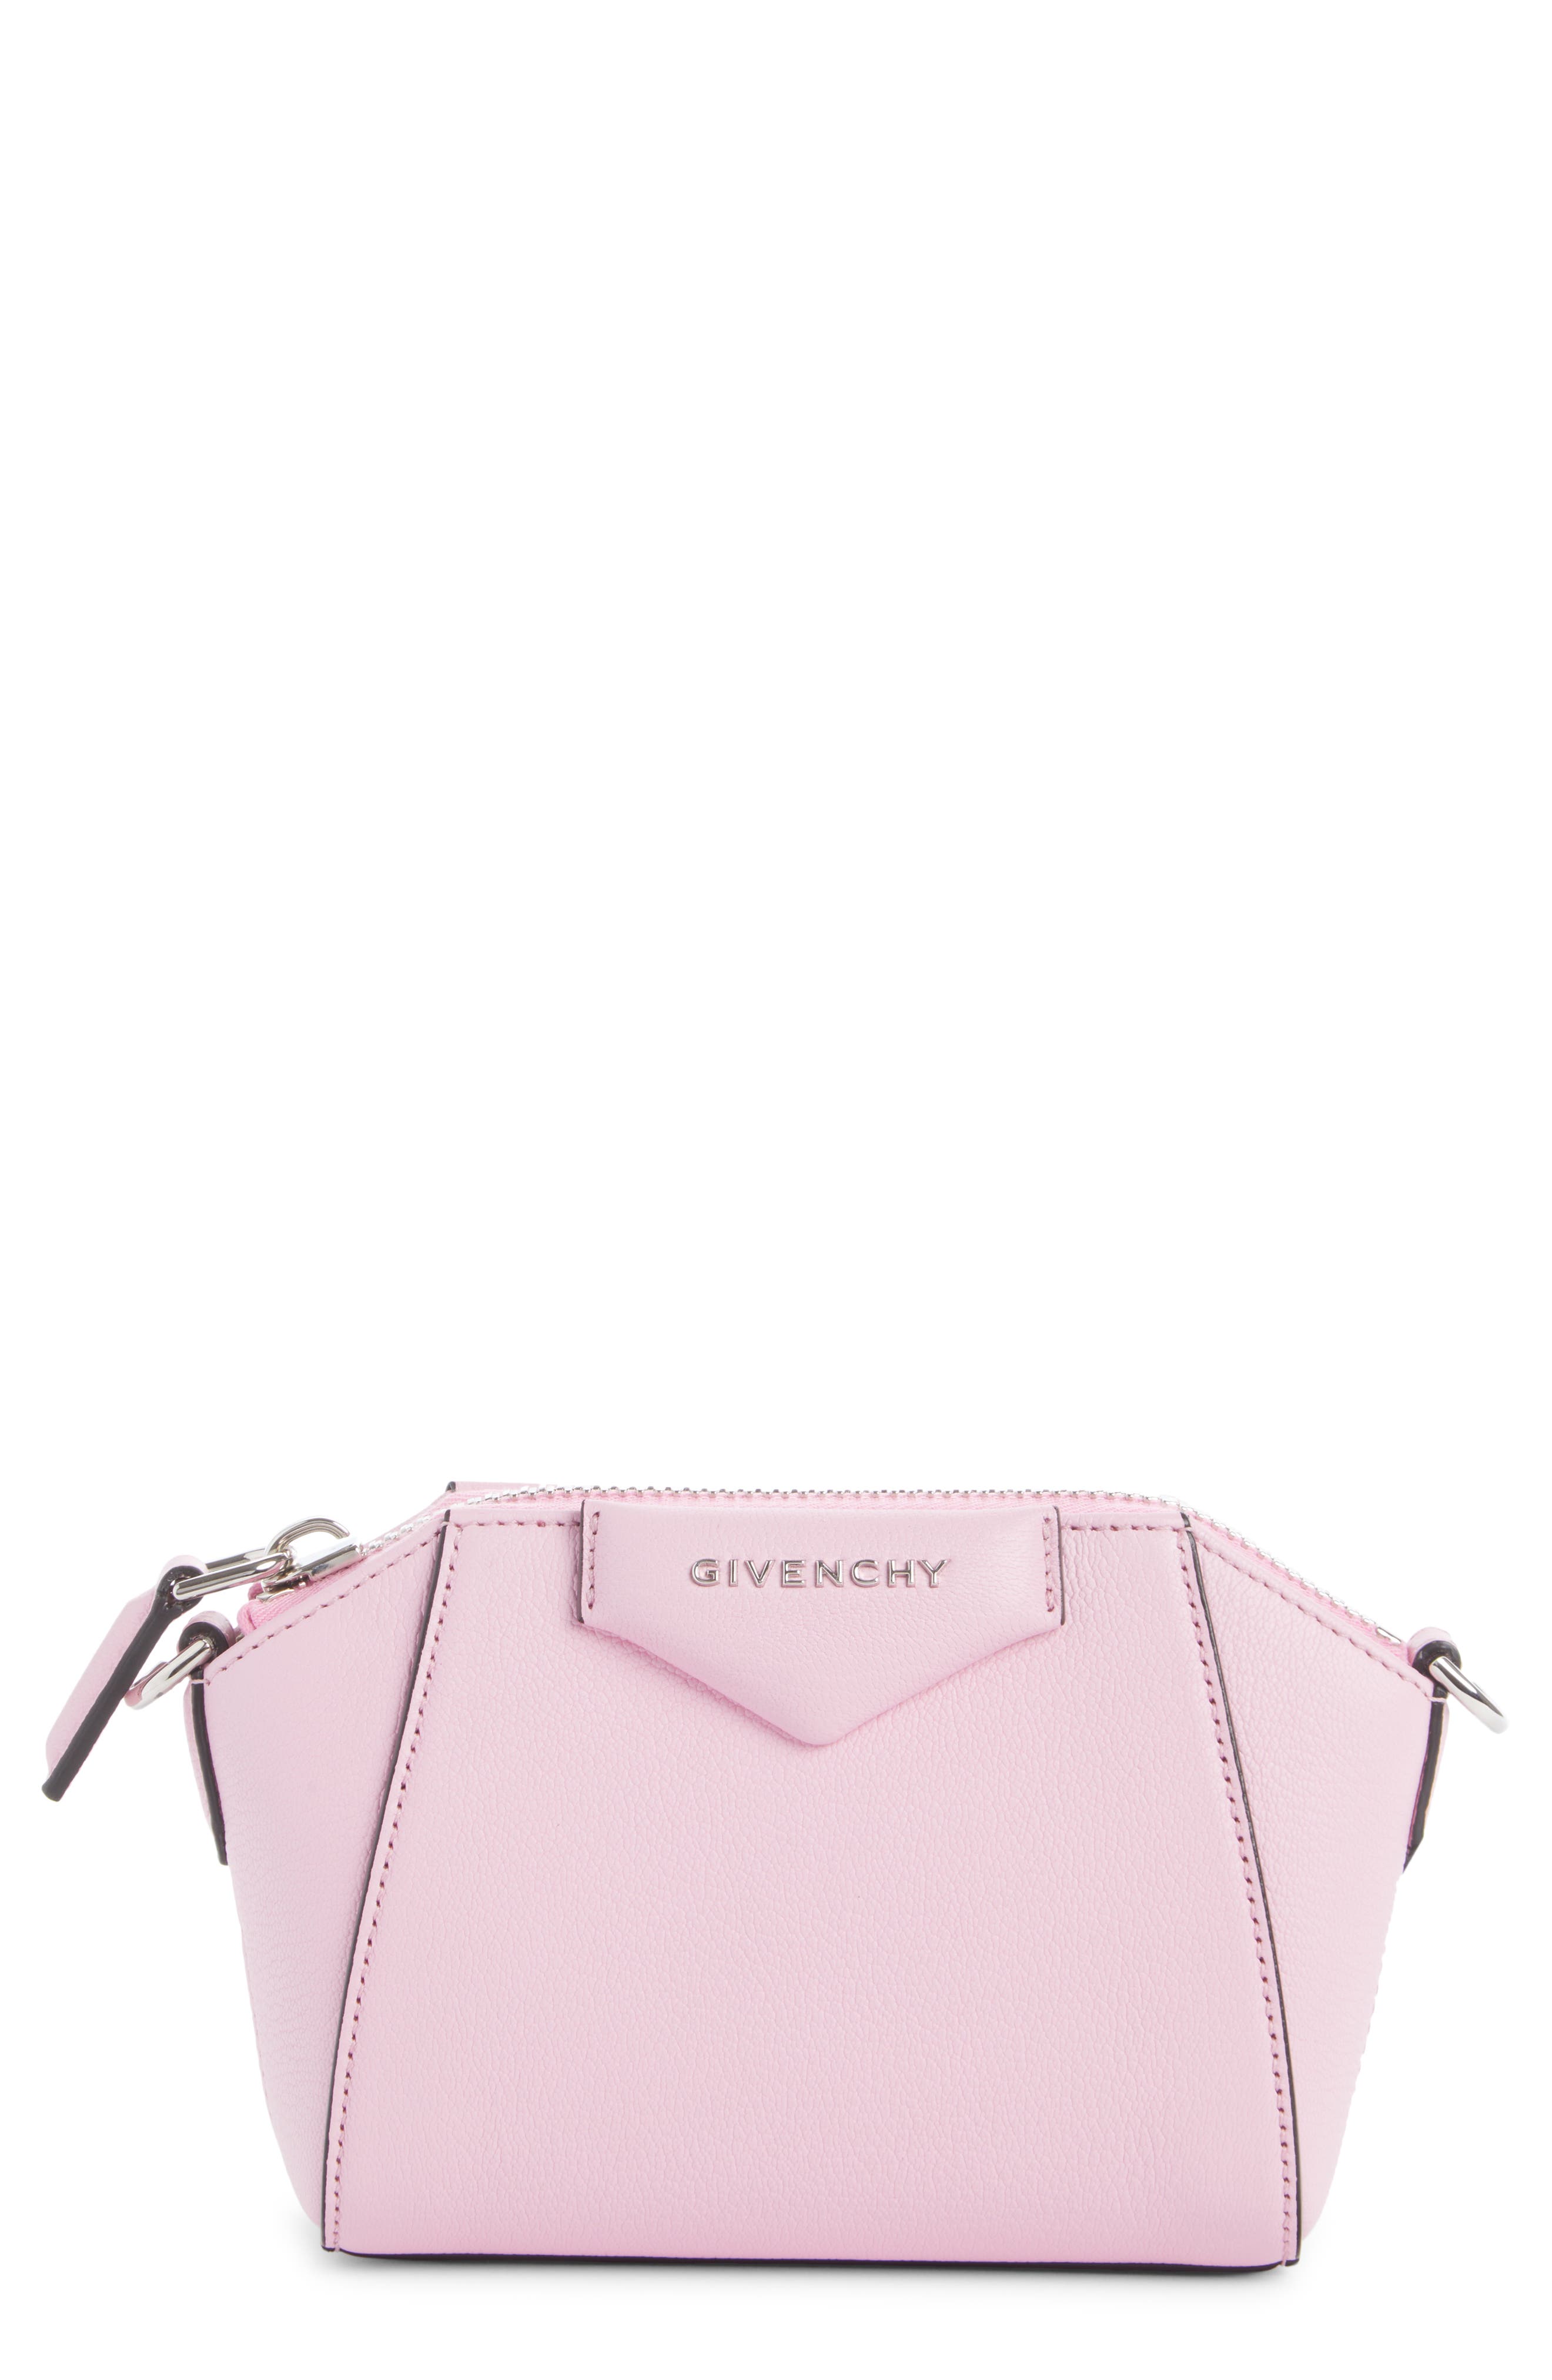 givenchy an